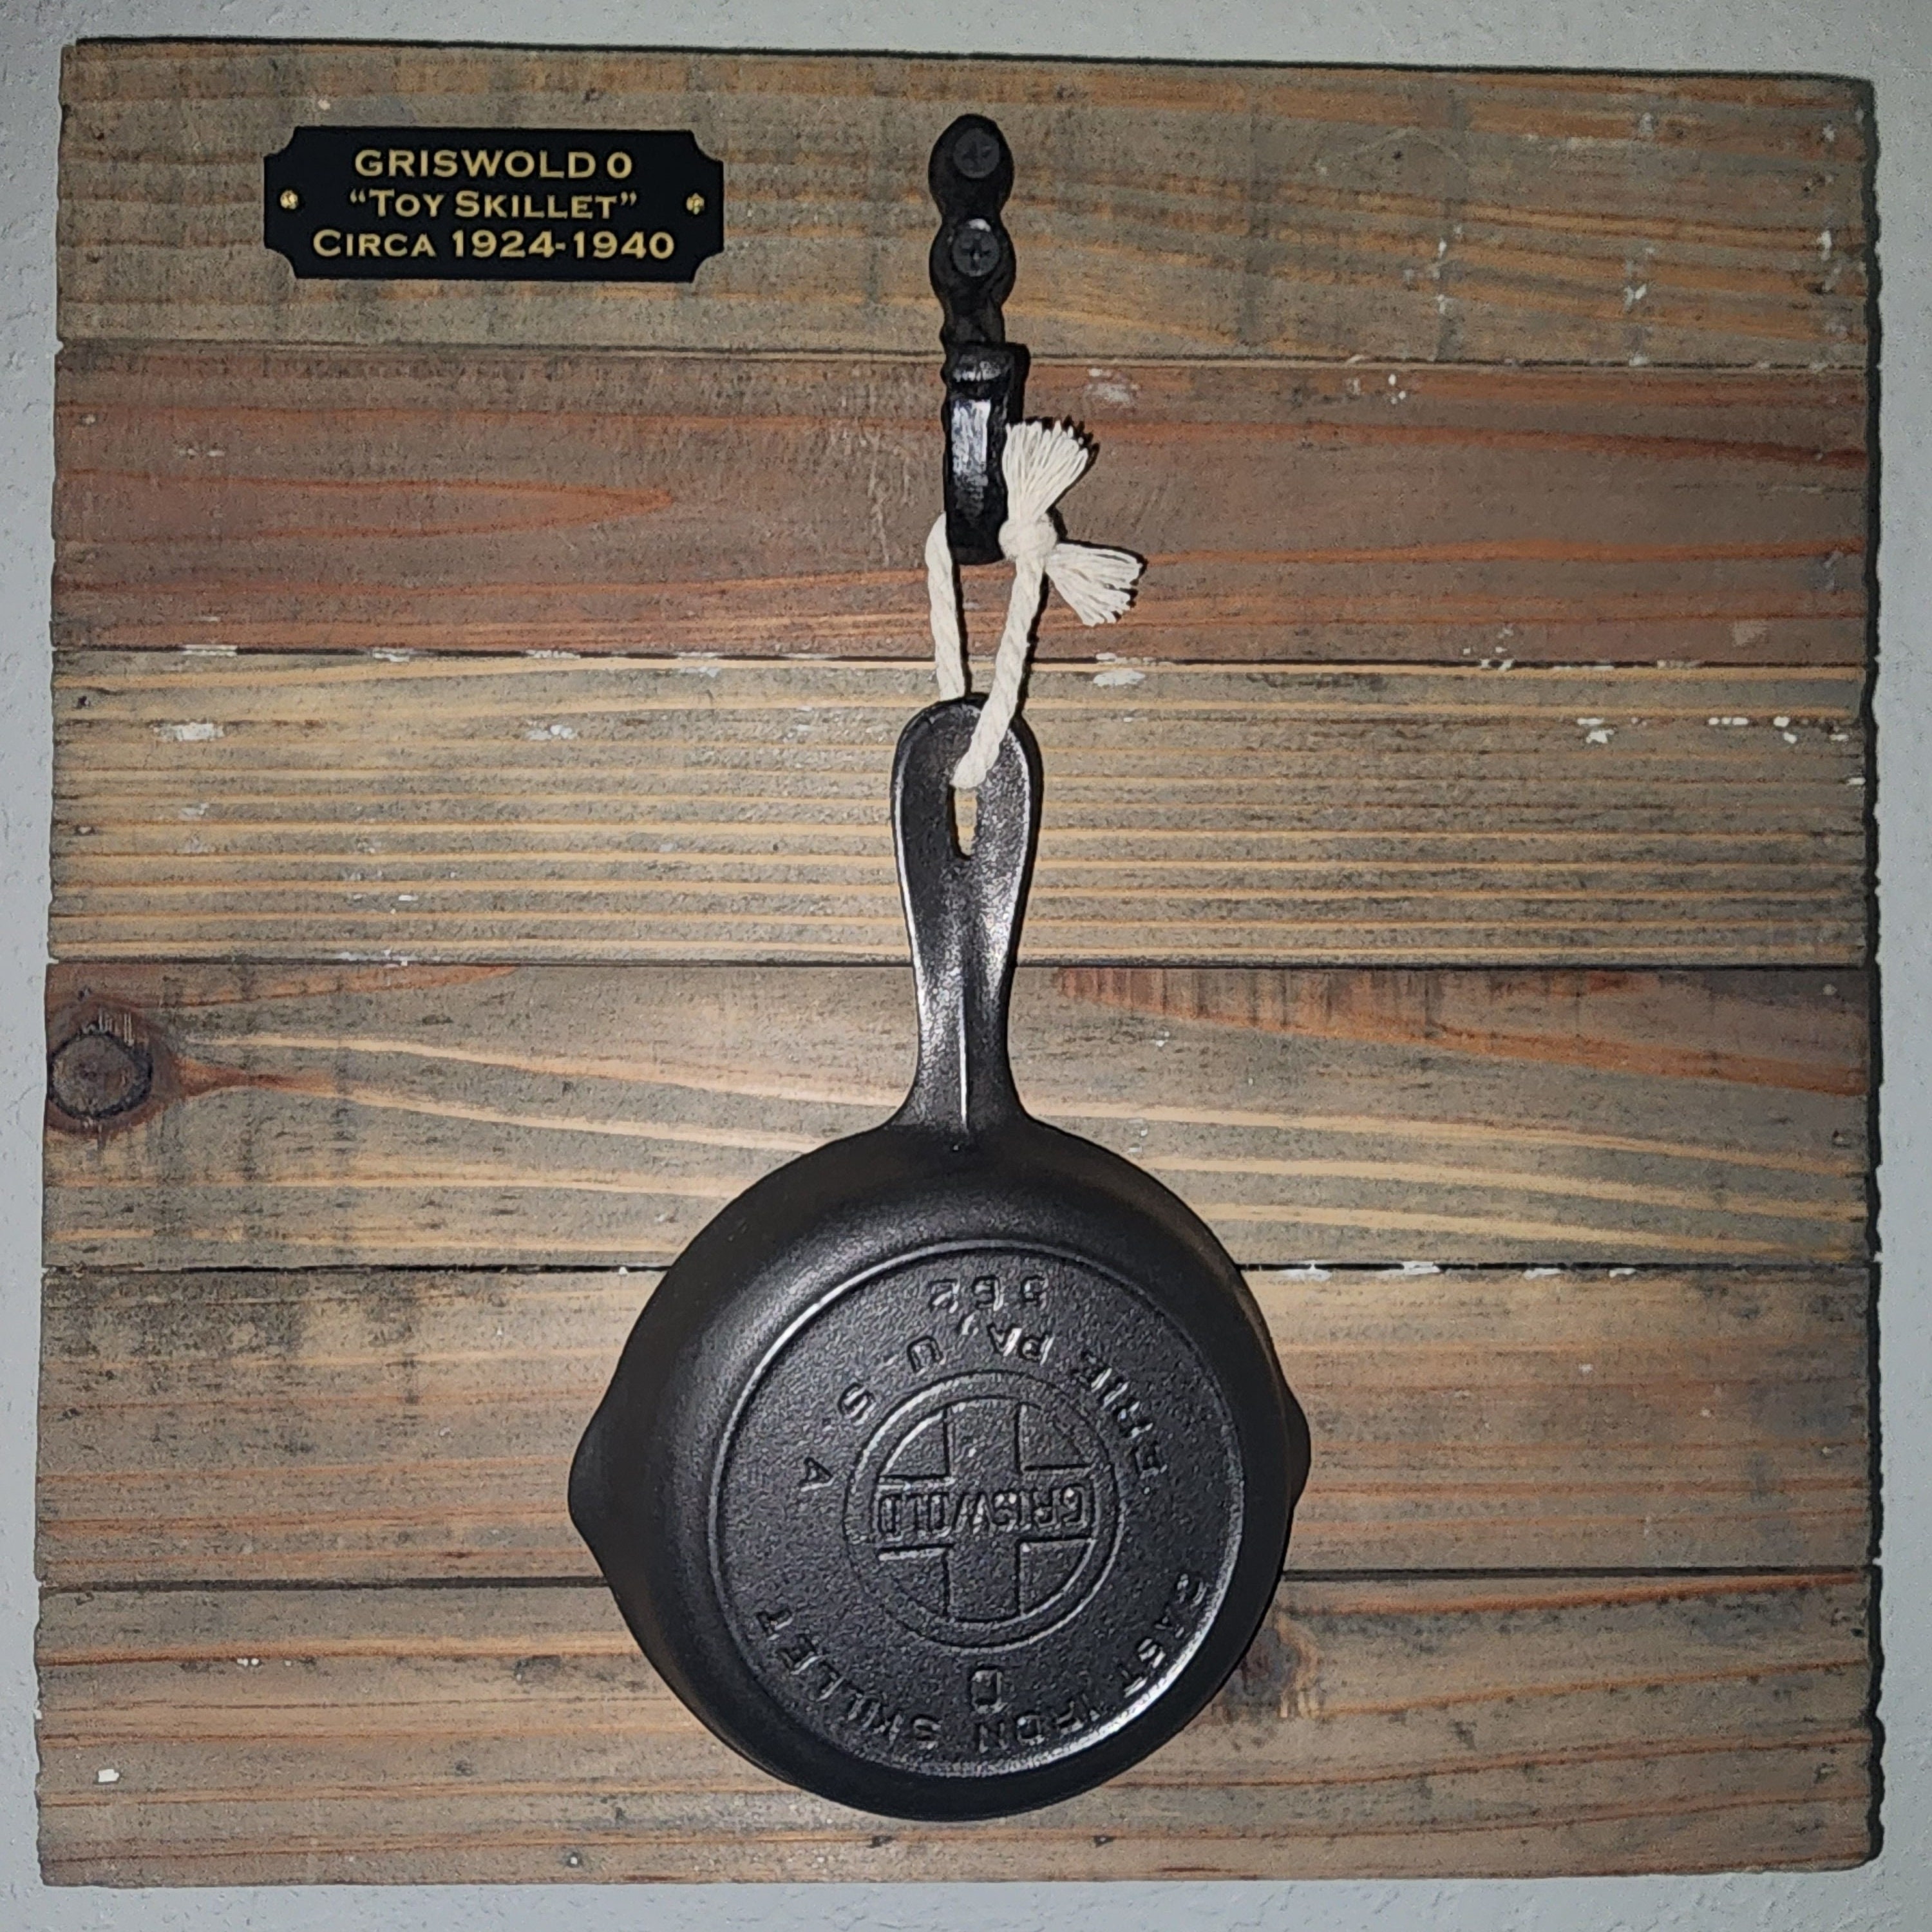 Griswold Cast Iron Skillet Collection c. 1924-1940 sold at auction